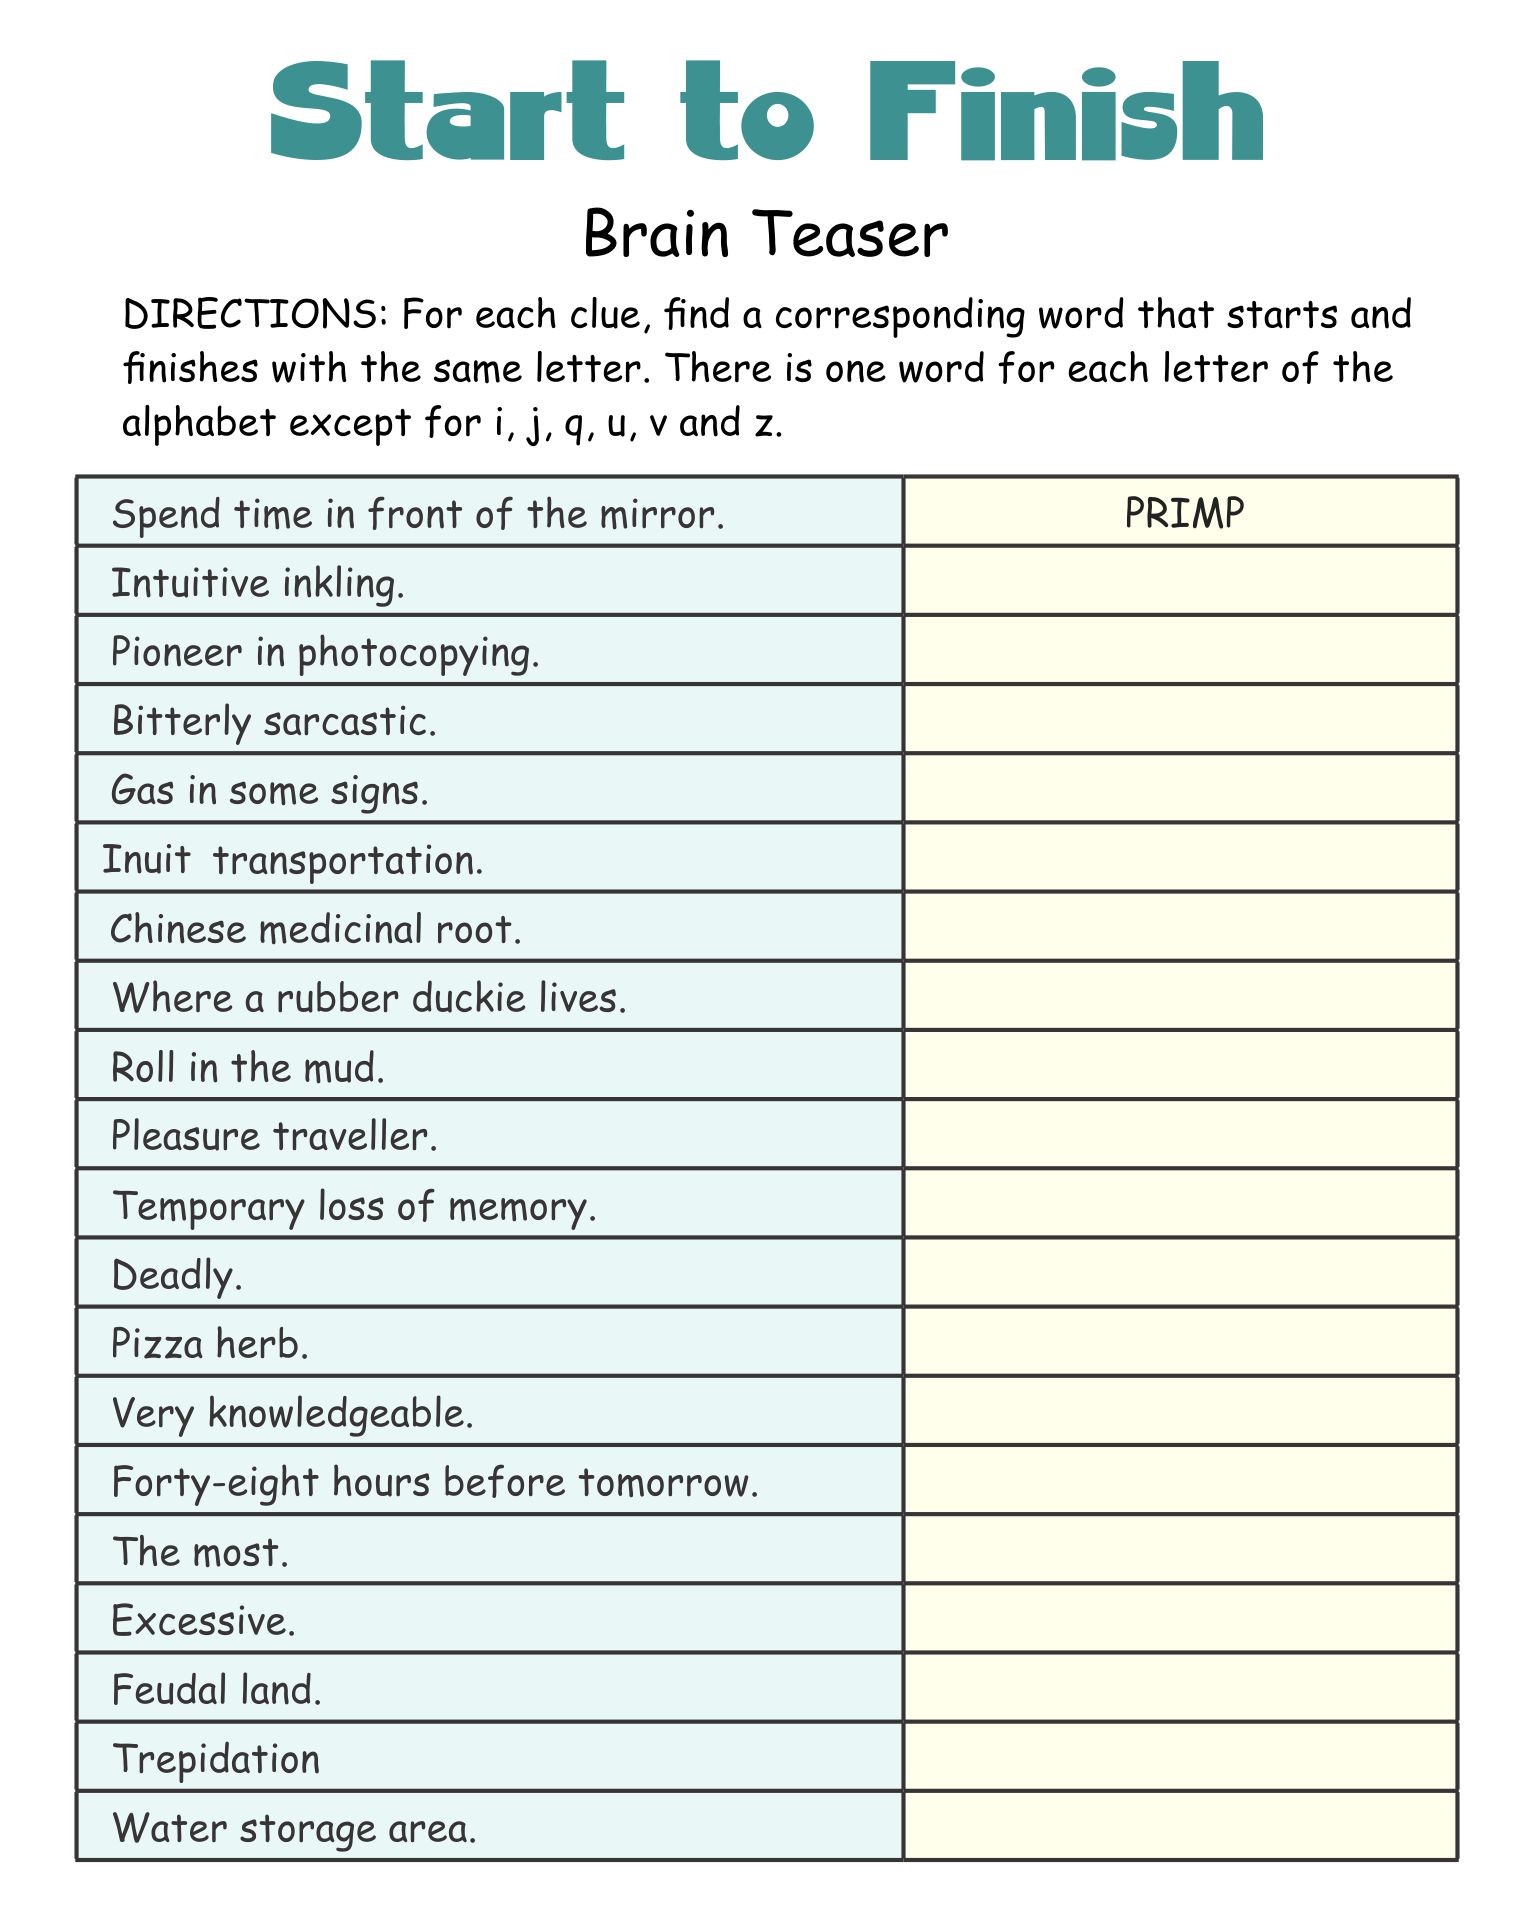 free-printable-cognitive-exercises-printable-templates